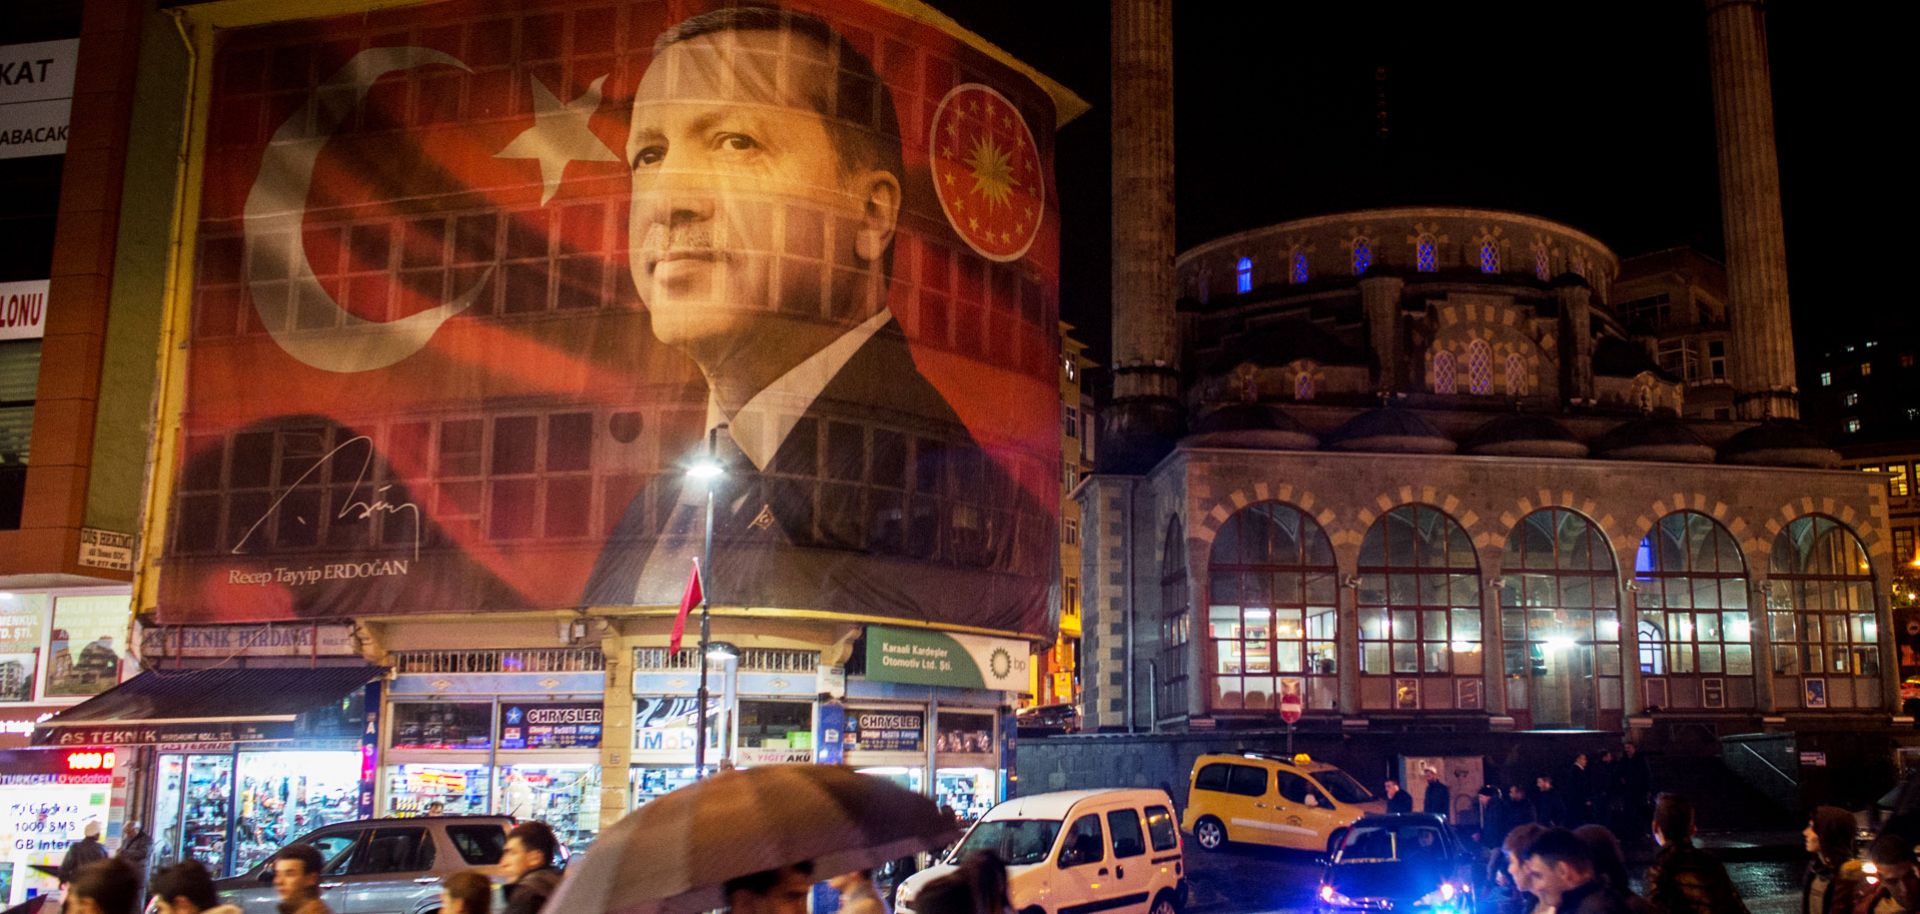 Turkish President Recep Tayyip Erdogan's seemingly fickle foreign policy has baffled leaders in Russia and the European Union, but it reflects his country's strategic goals.